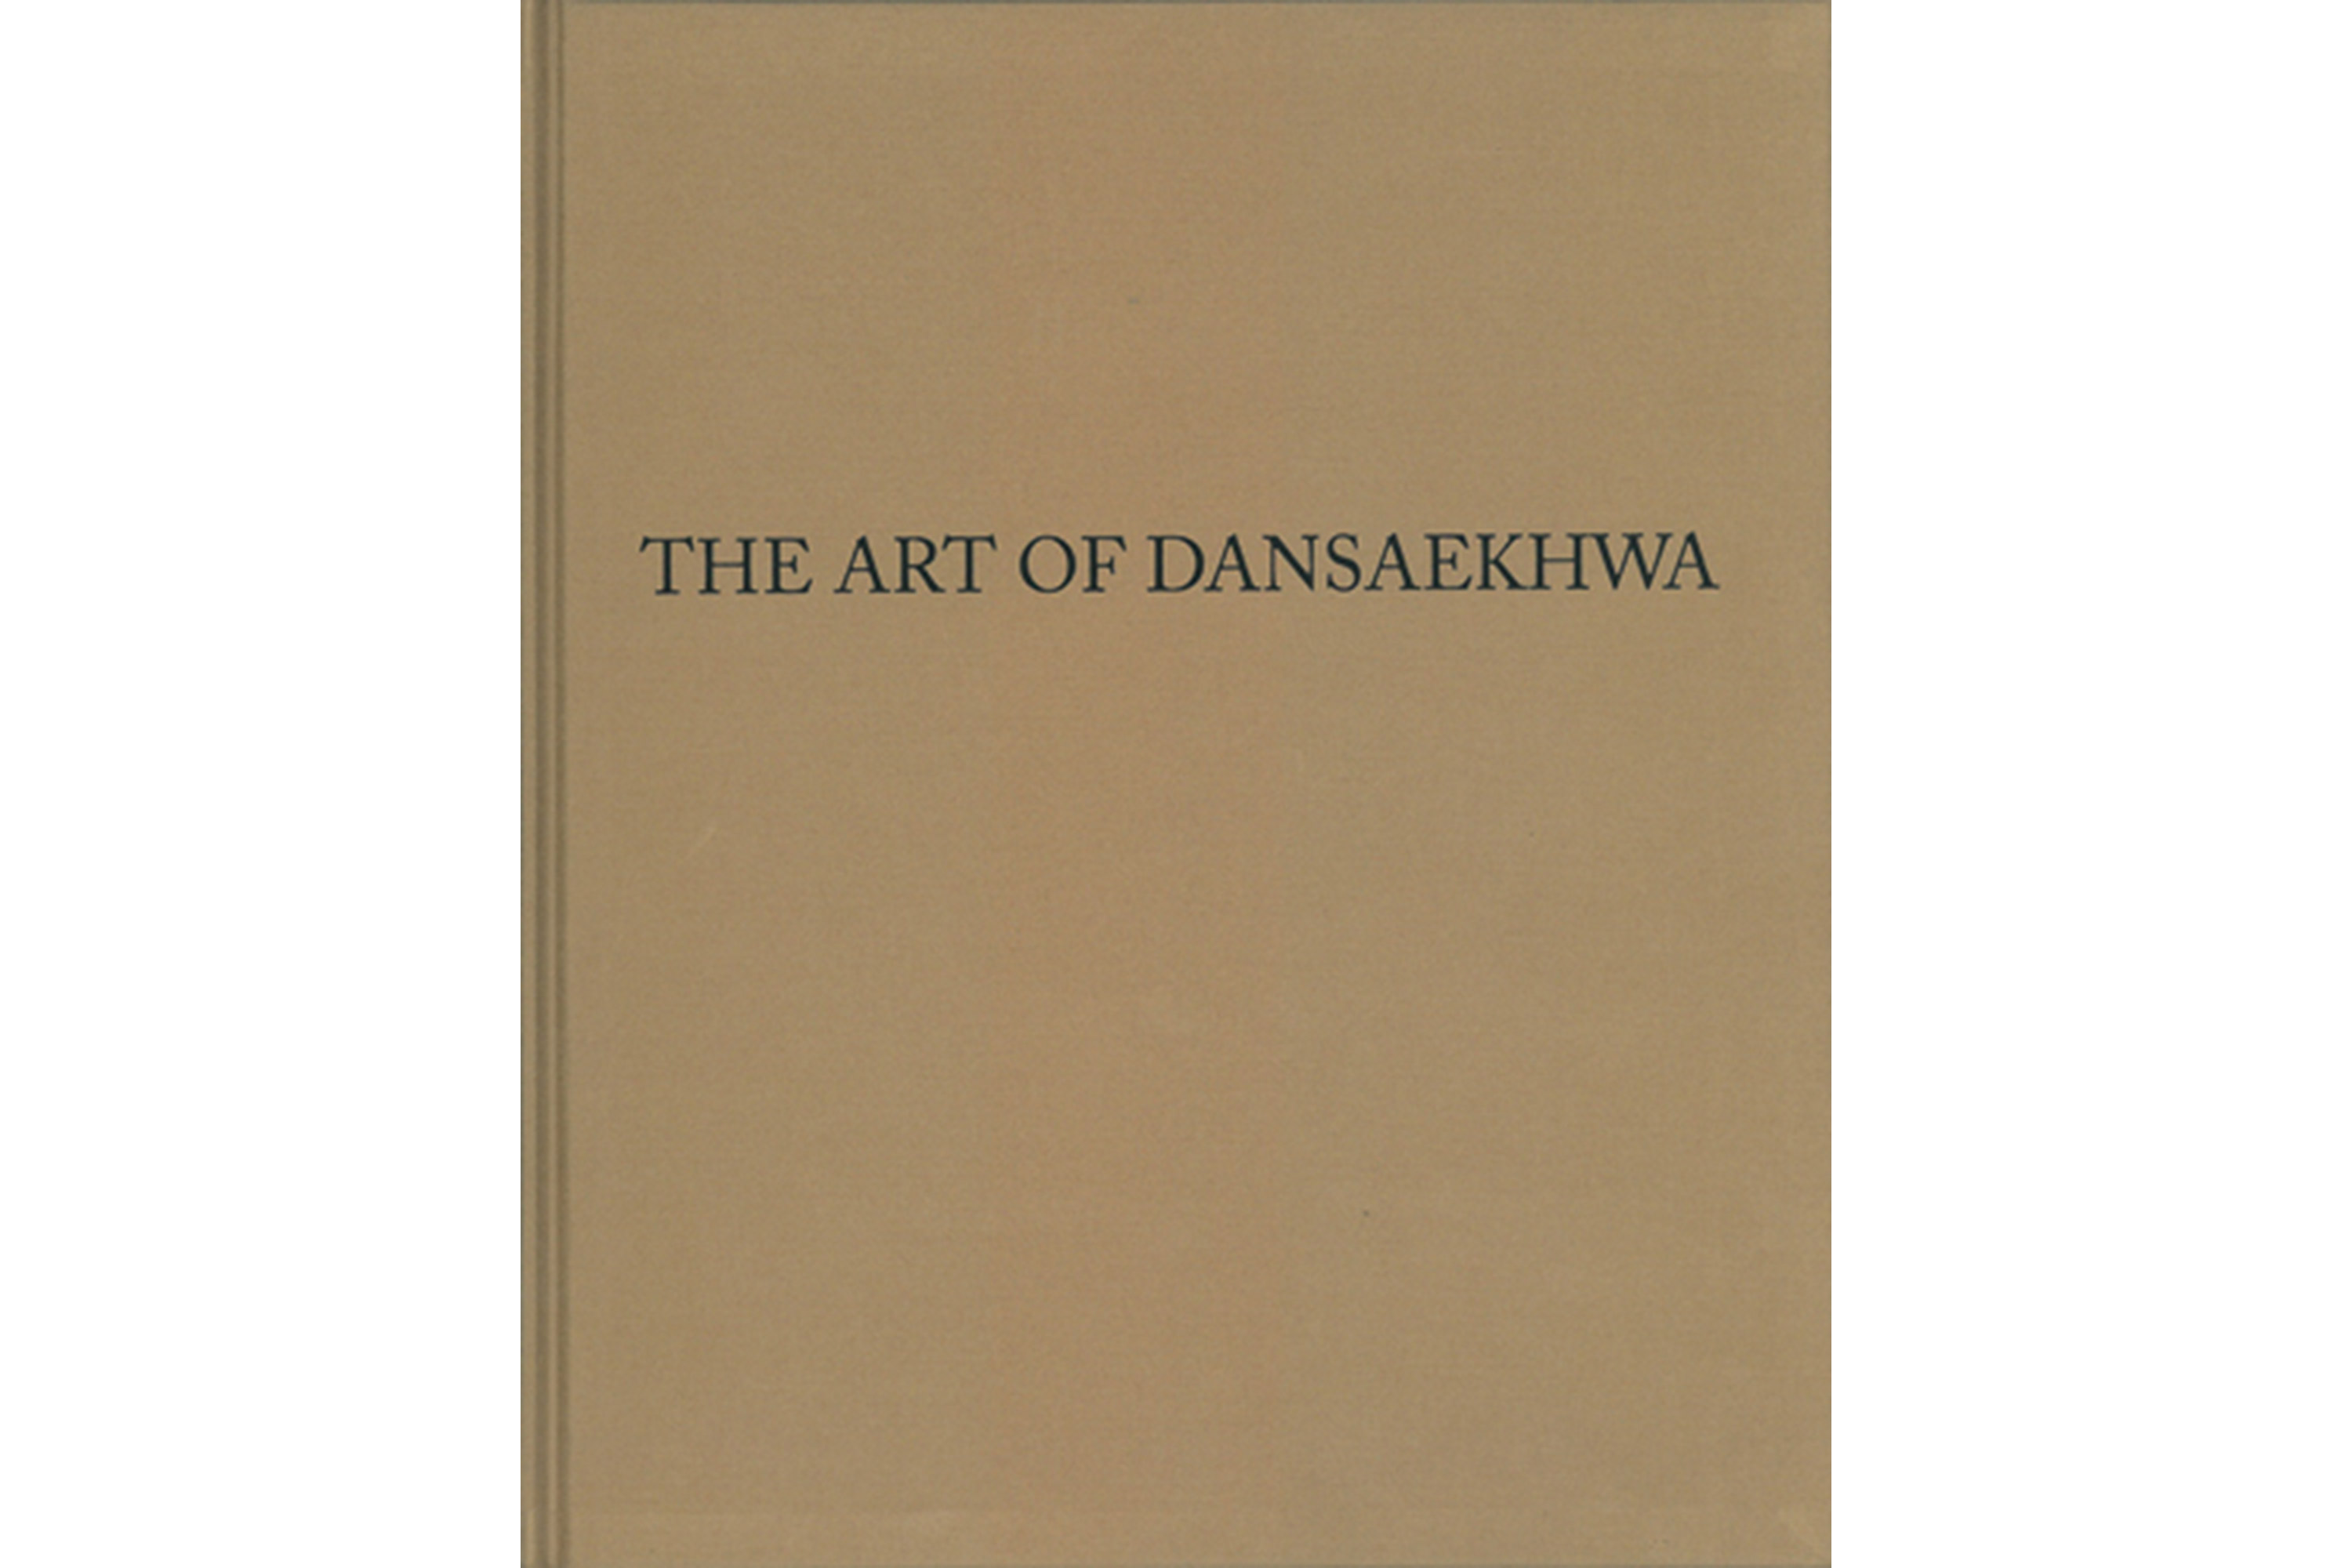 I want to brag about this for a long time': Dansaekhwa pioneer